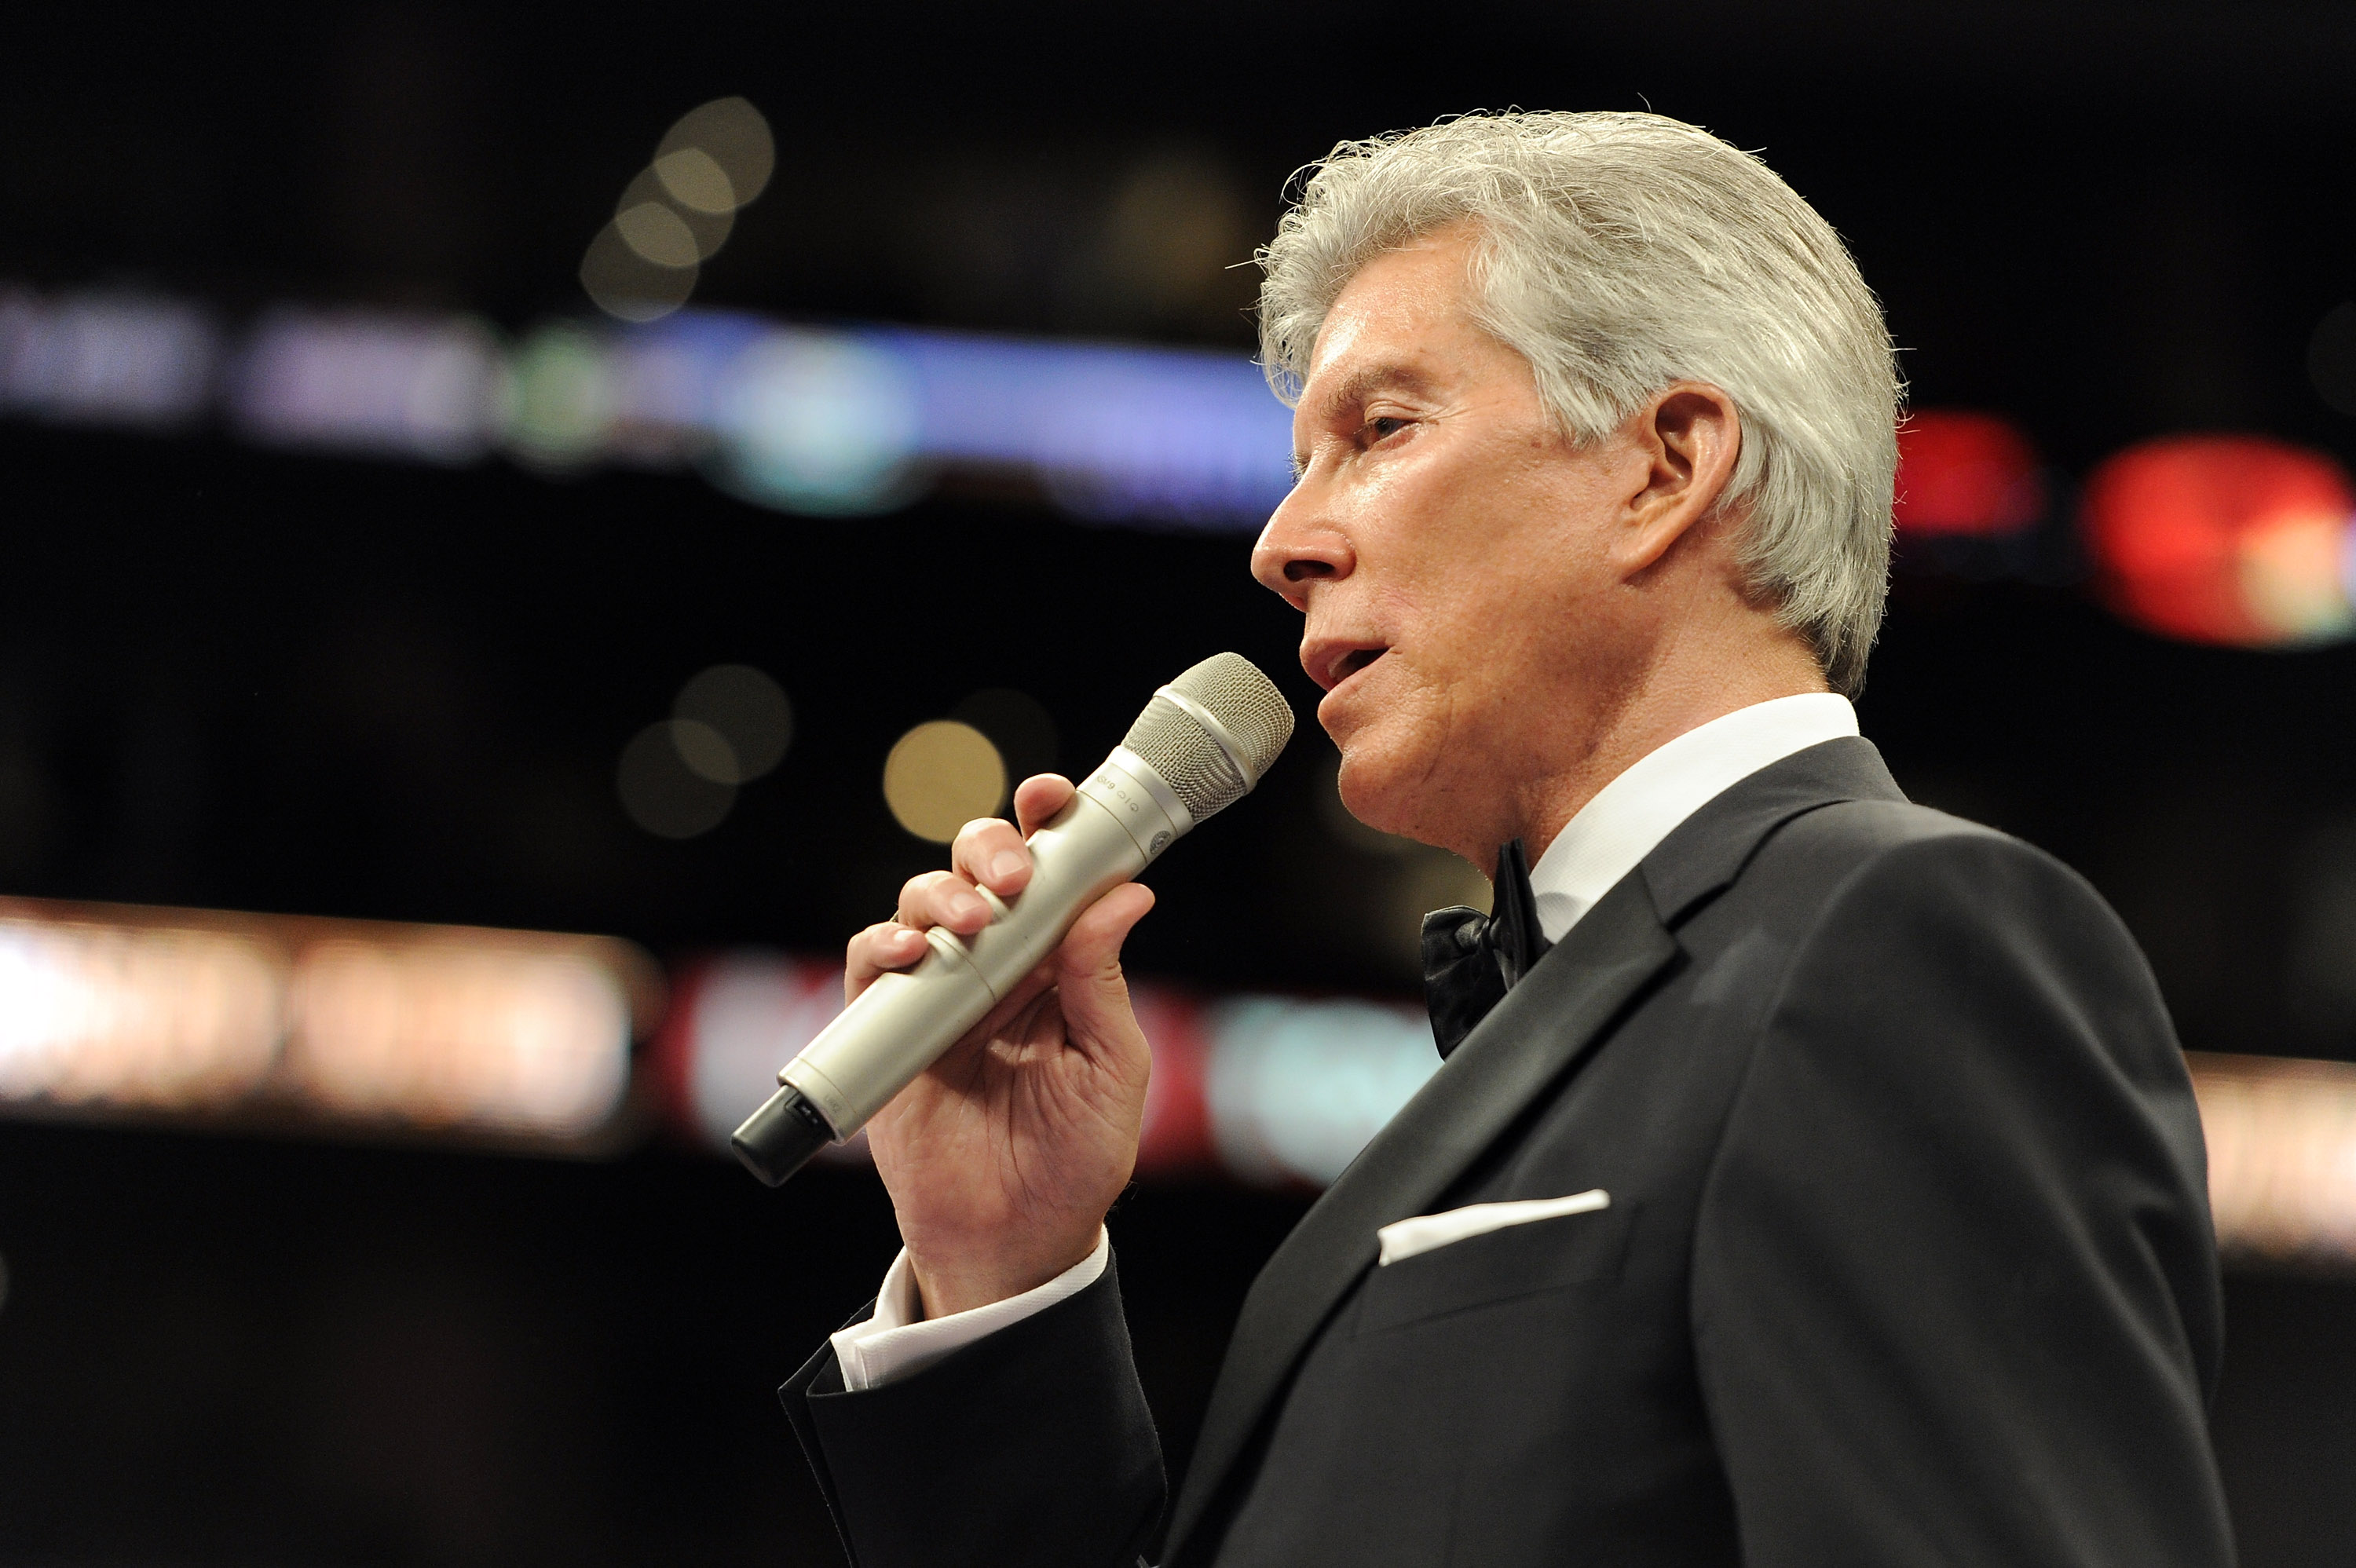 LOS ANGELES, CA - SEPTEMBER 18:  Announcer Michael Buffer before the Middleweight bout against Shane Mosley and Sergio Mora at Staples Center on September 18, 2010 in Los Angeles, California.  (Photo by Harry How/Getty Images)